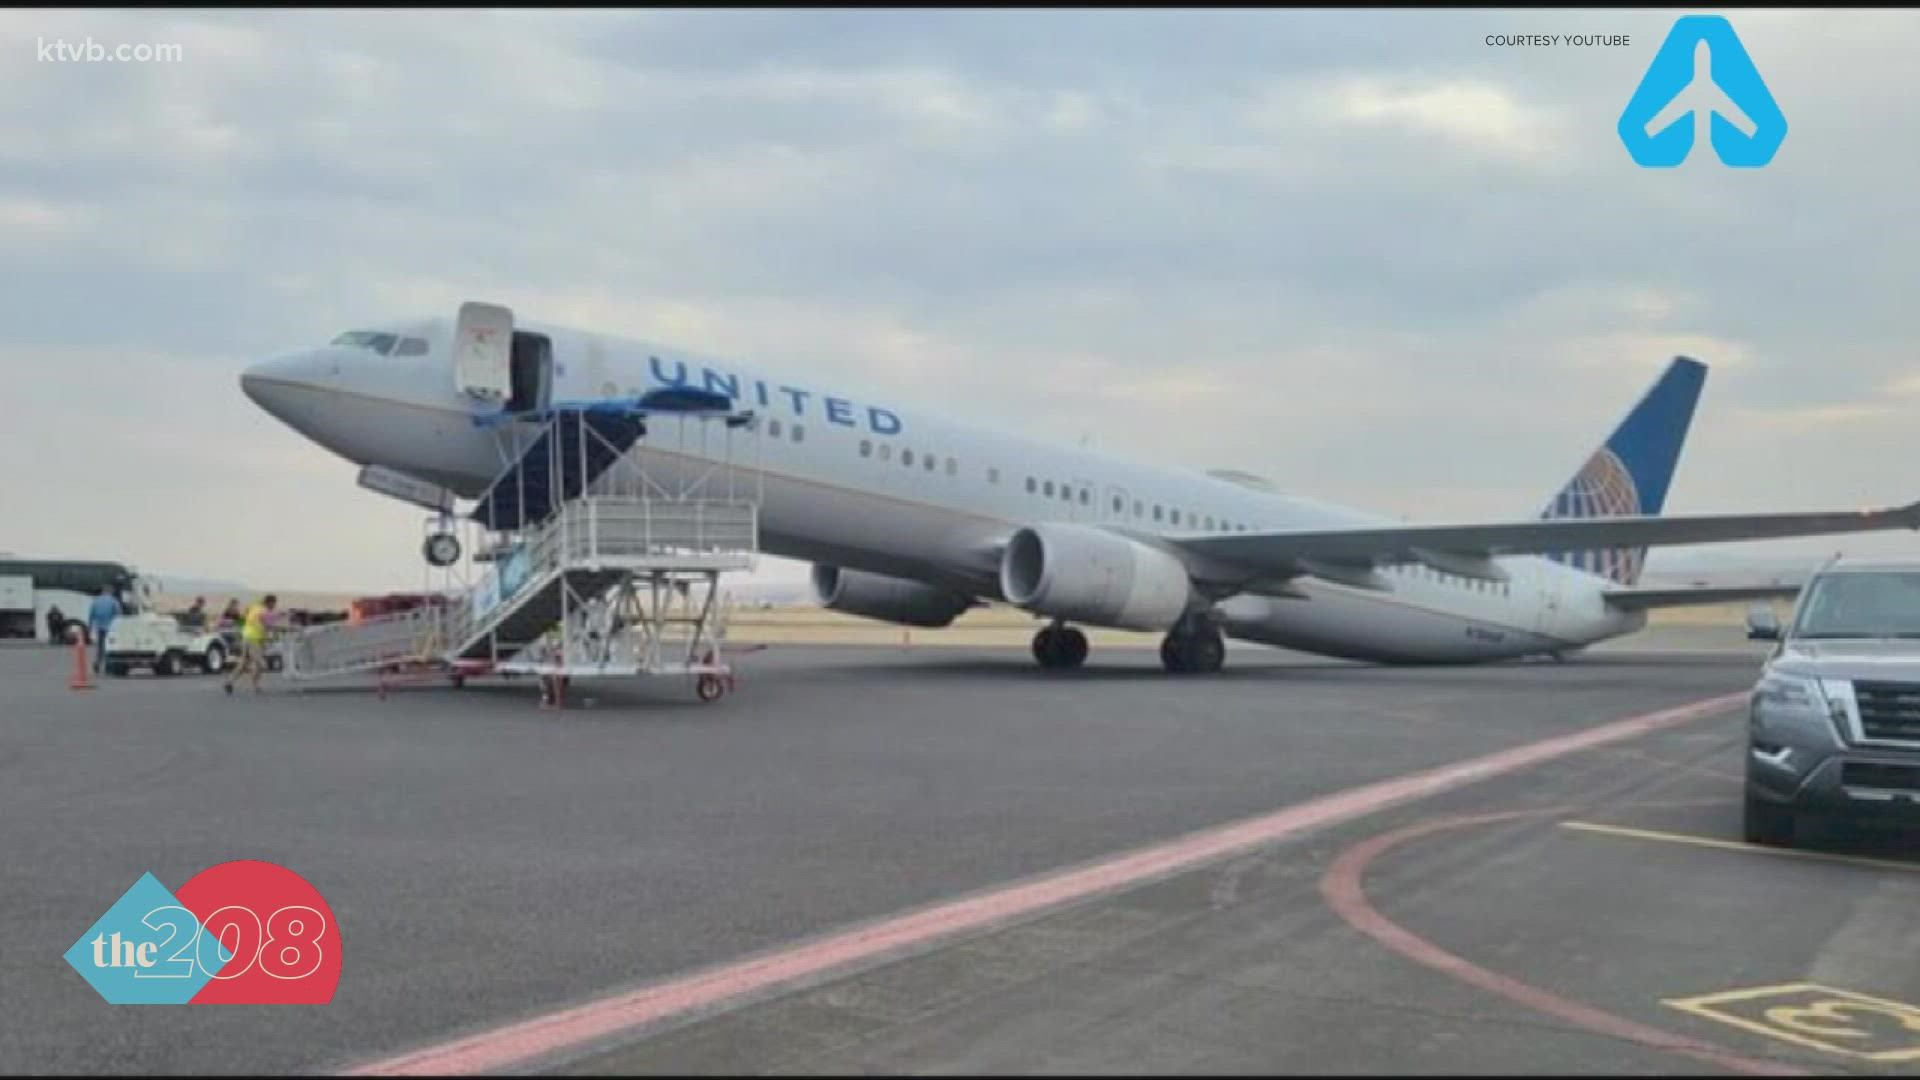 United Airlines officials say there was a shift in weight as luggage was being unloaded. No one was hurt.